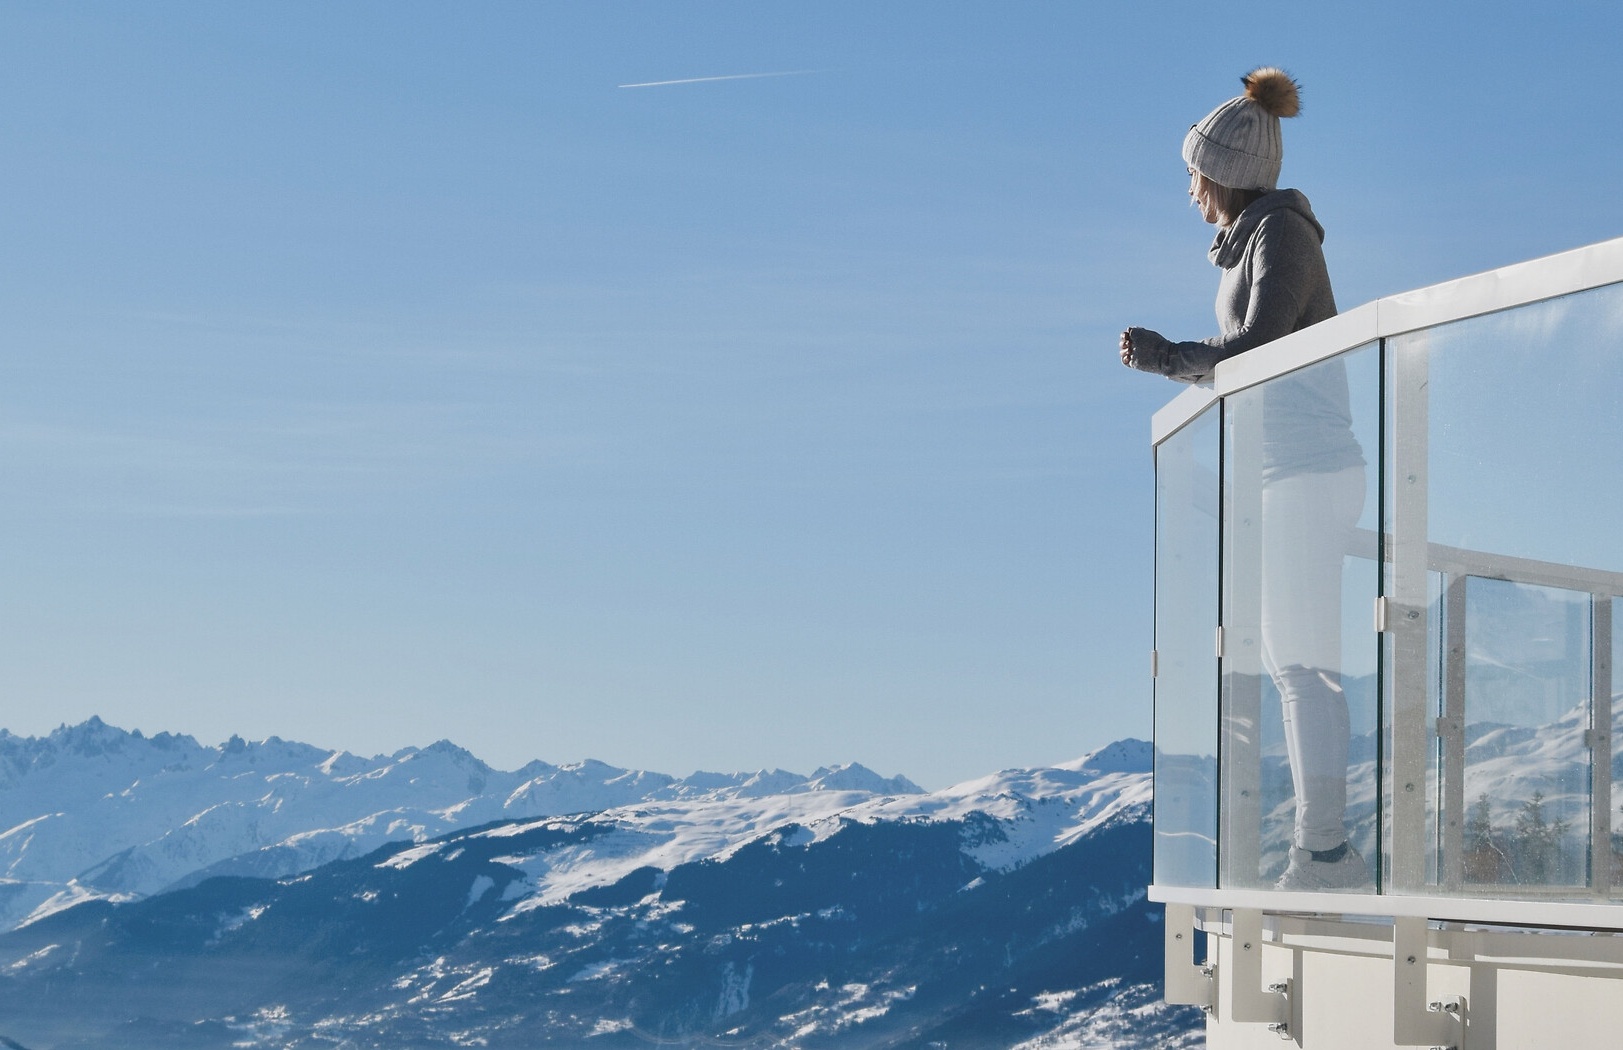 A young lay on a balcony overlooking the snow-capped mountains of the French alps